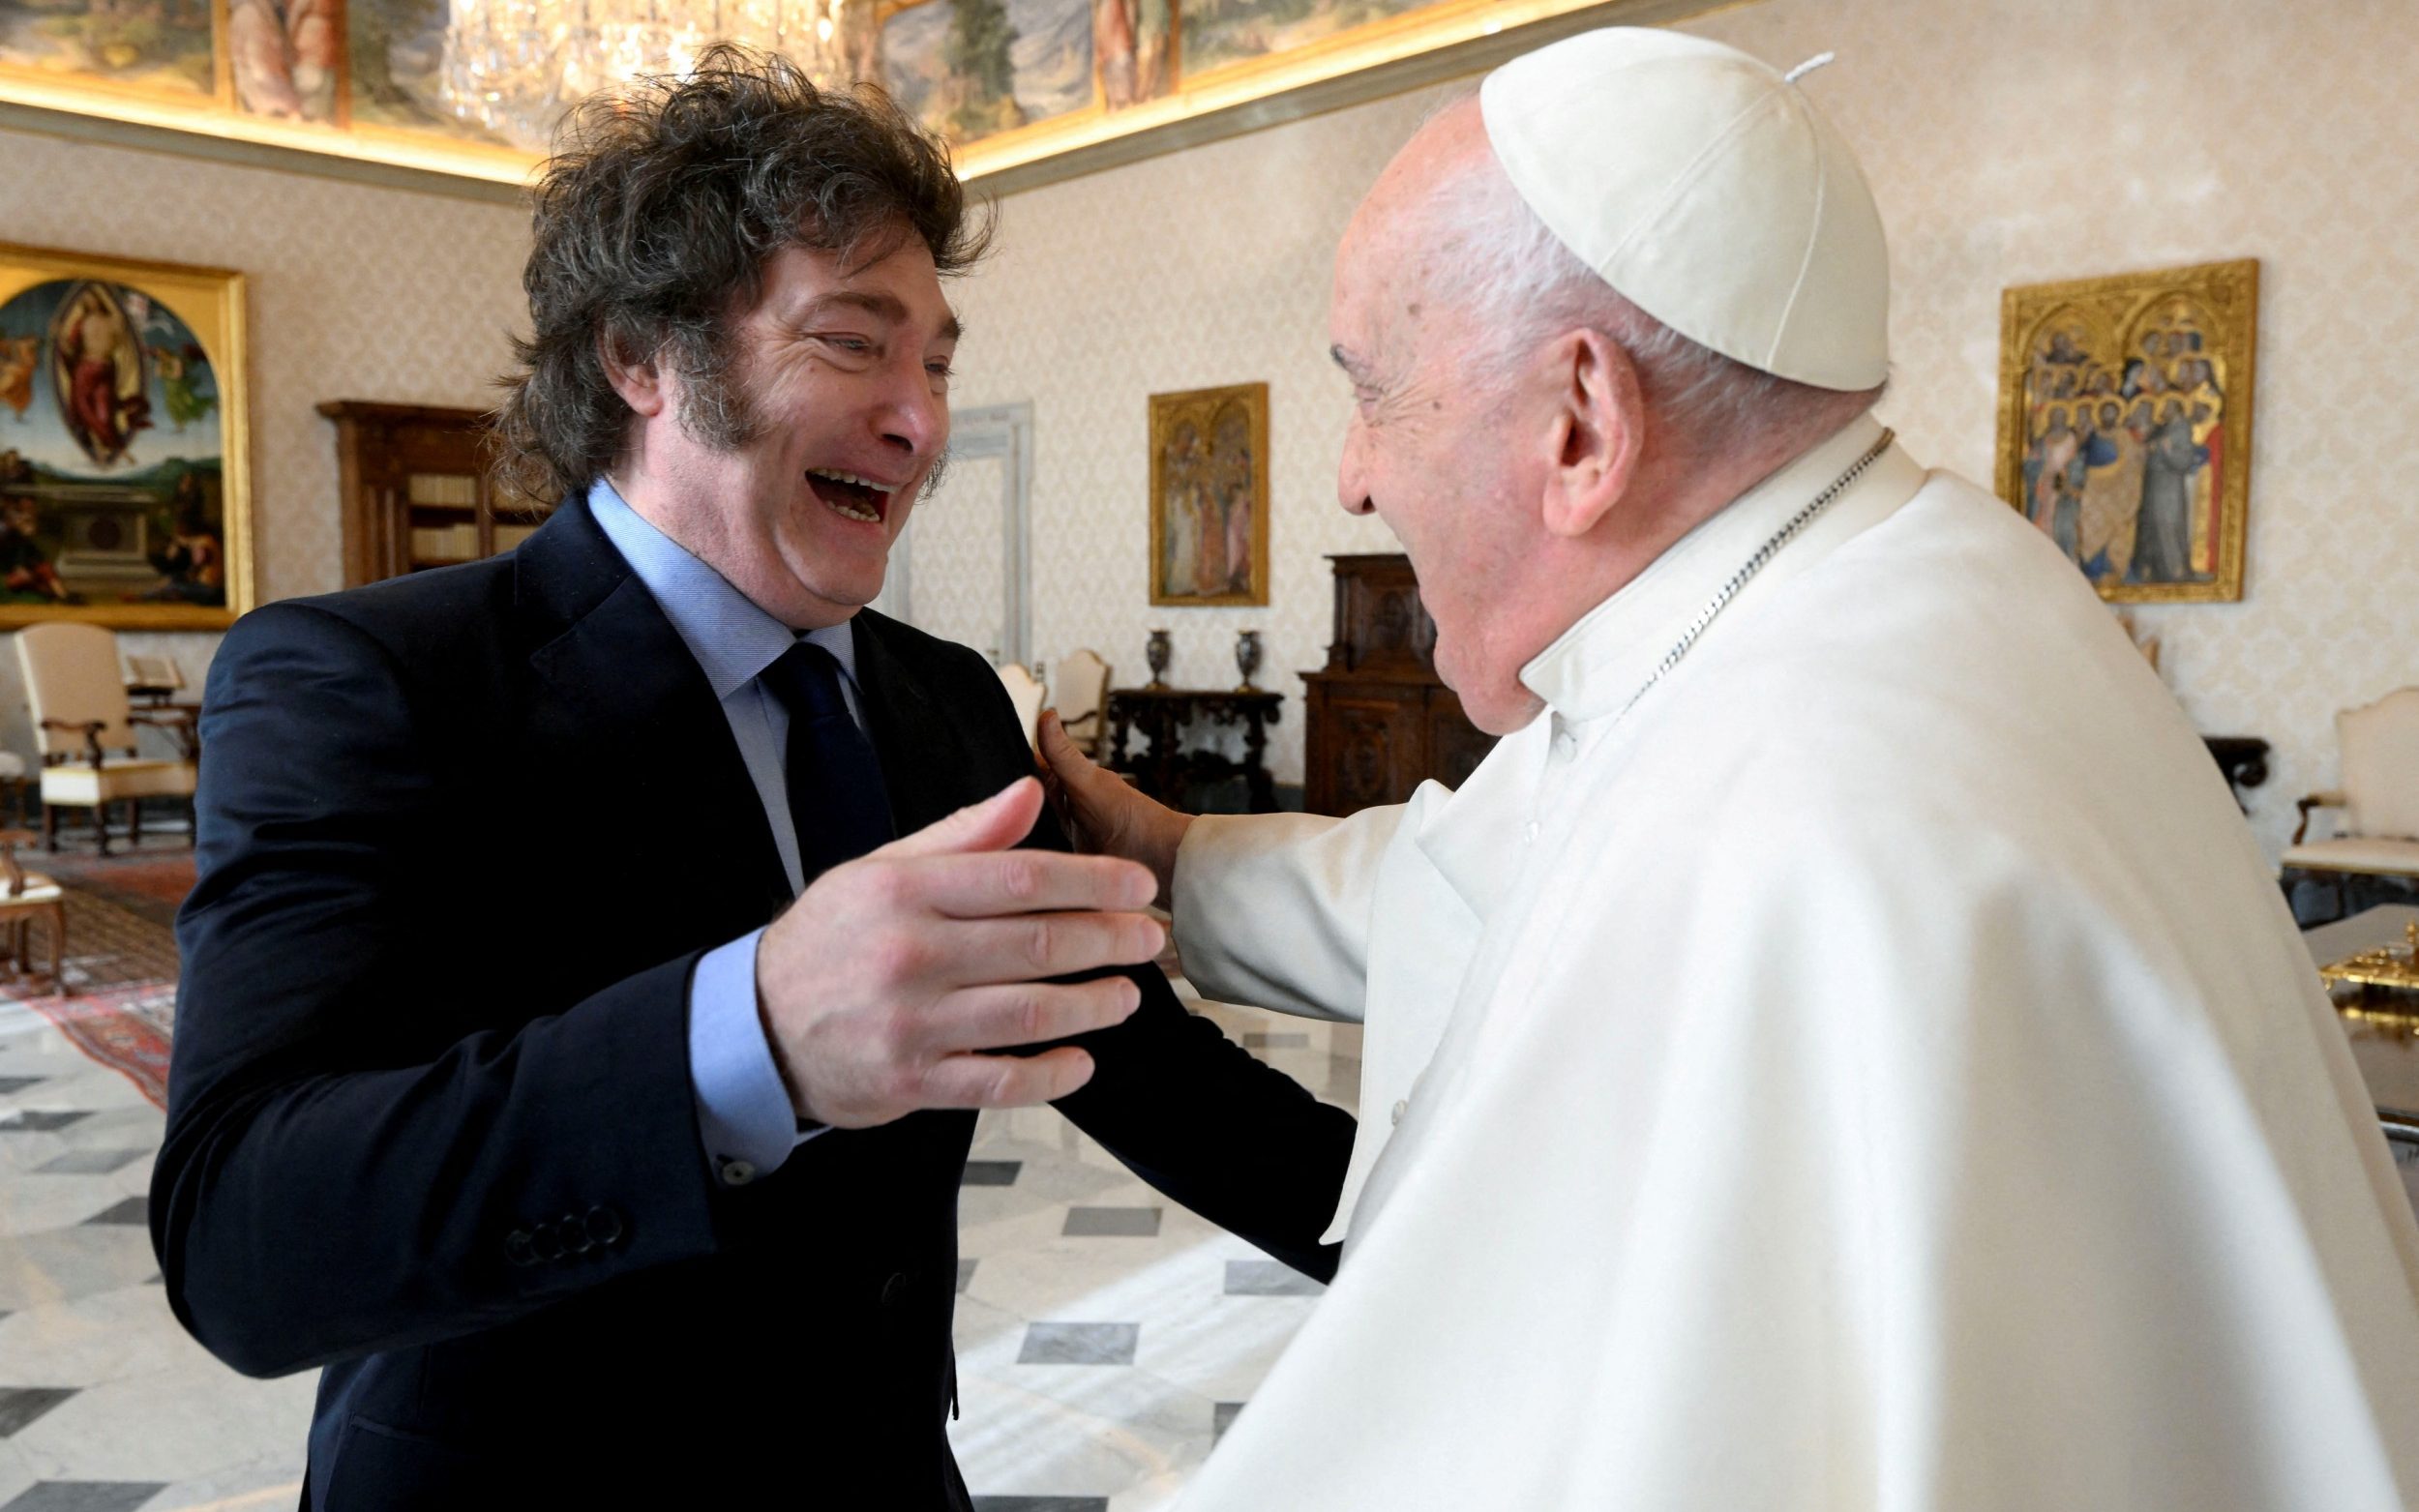 argentine president makes peace with sweet offering to countryman pope francis